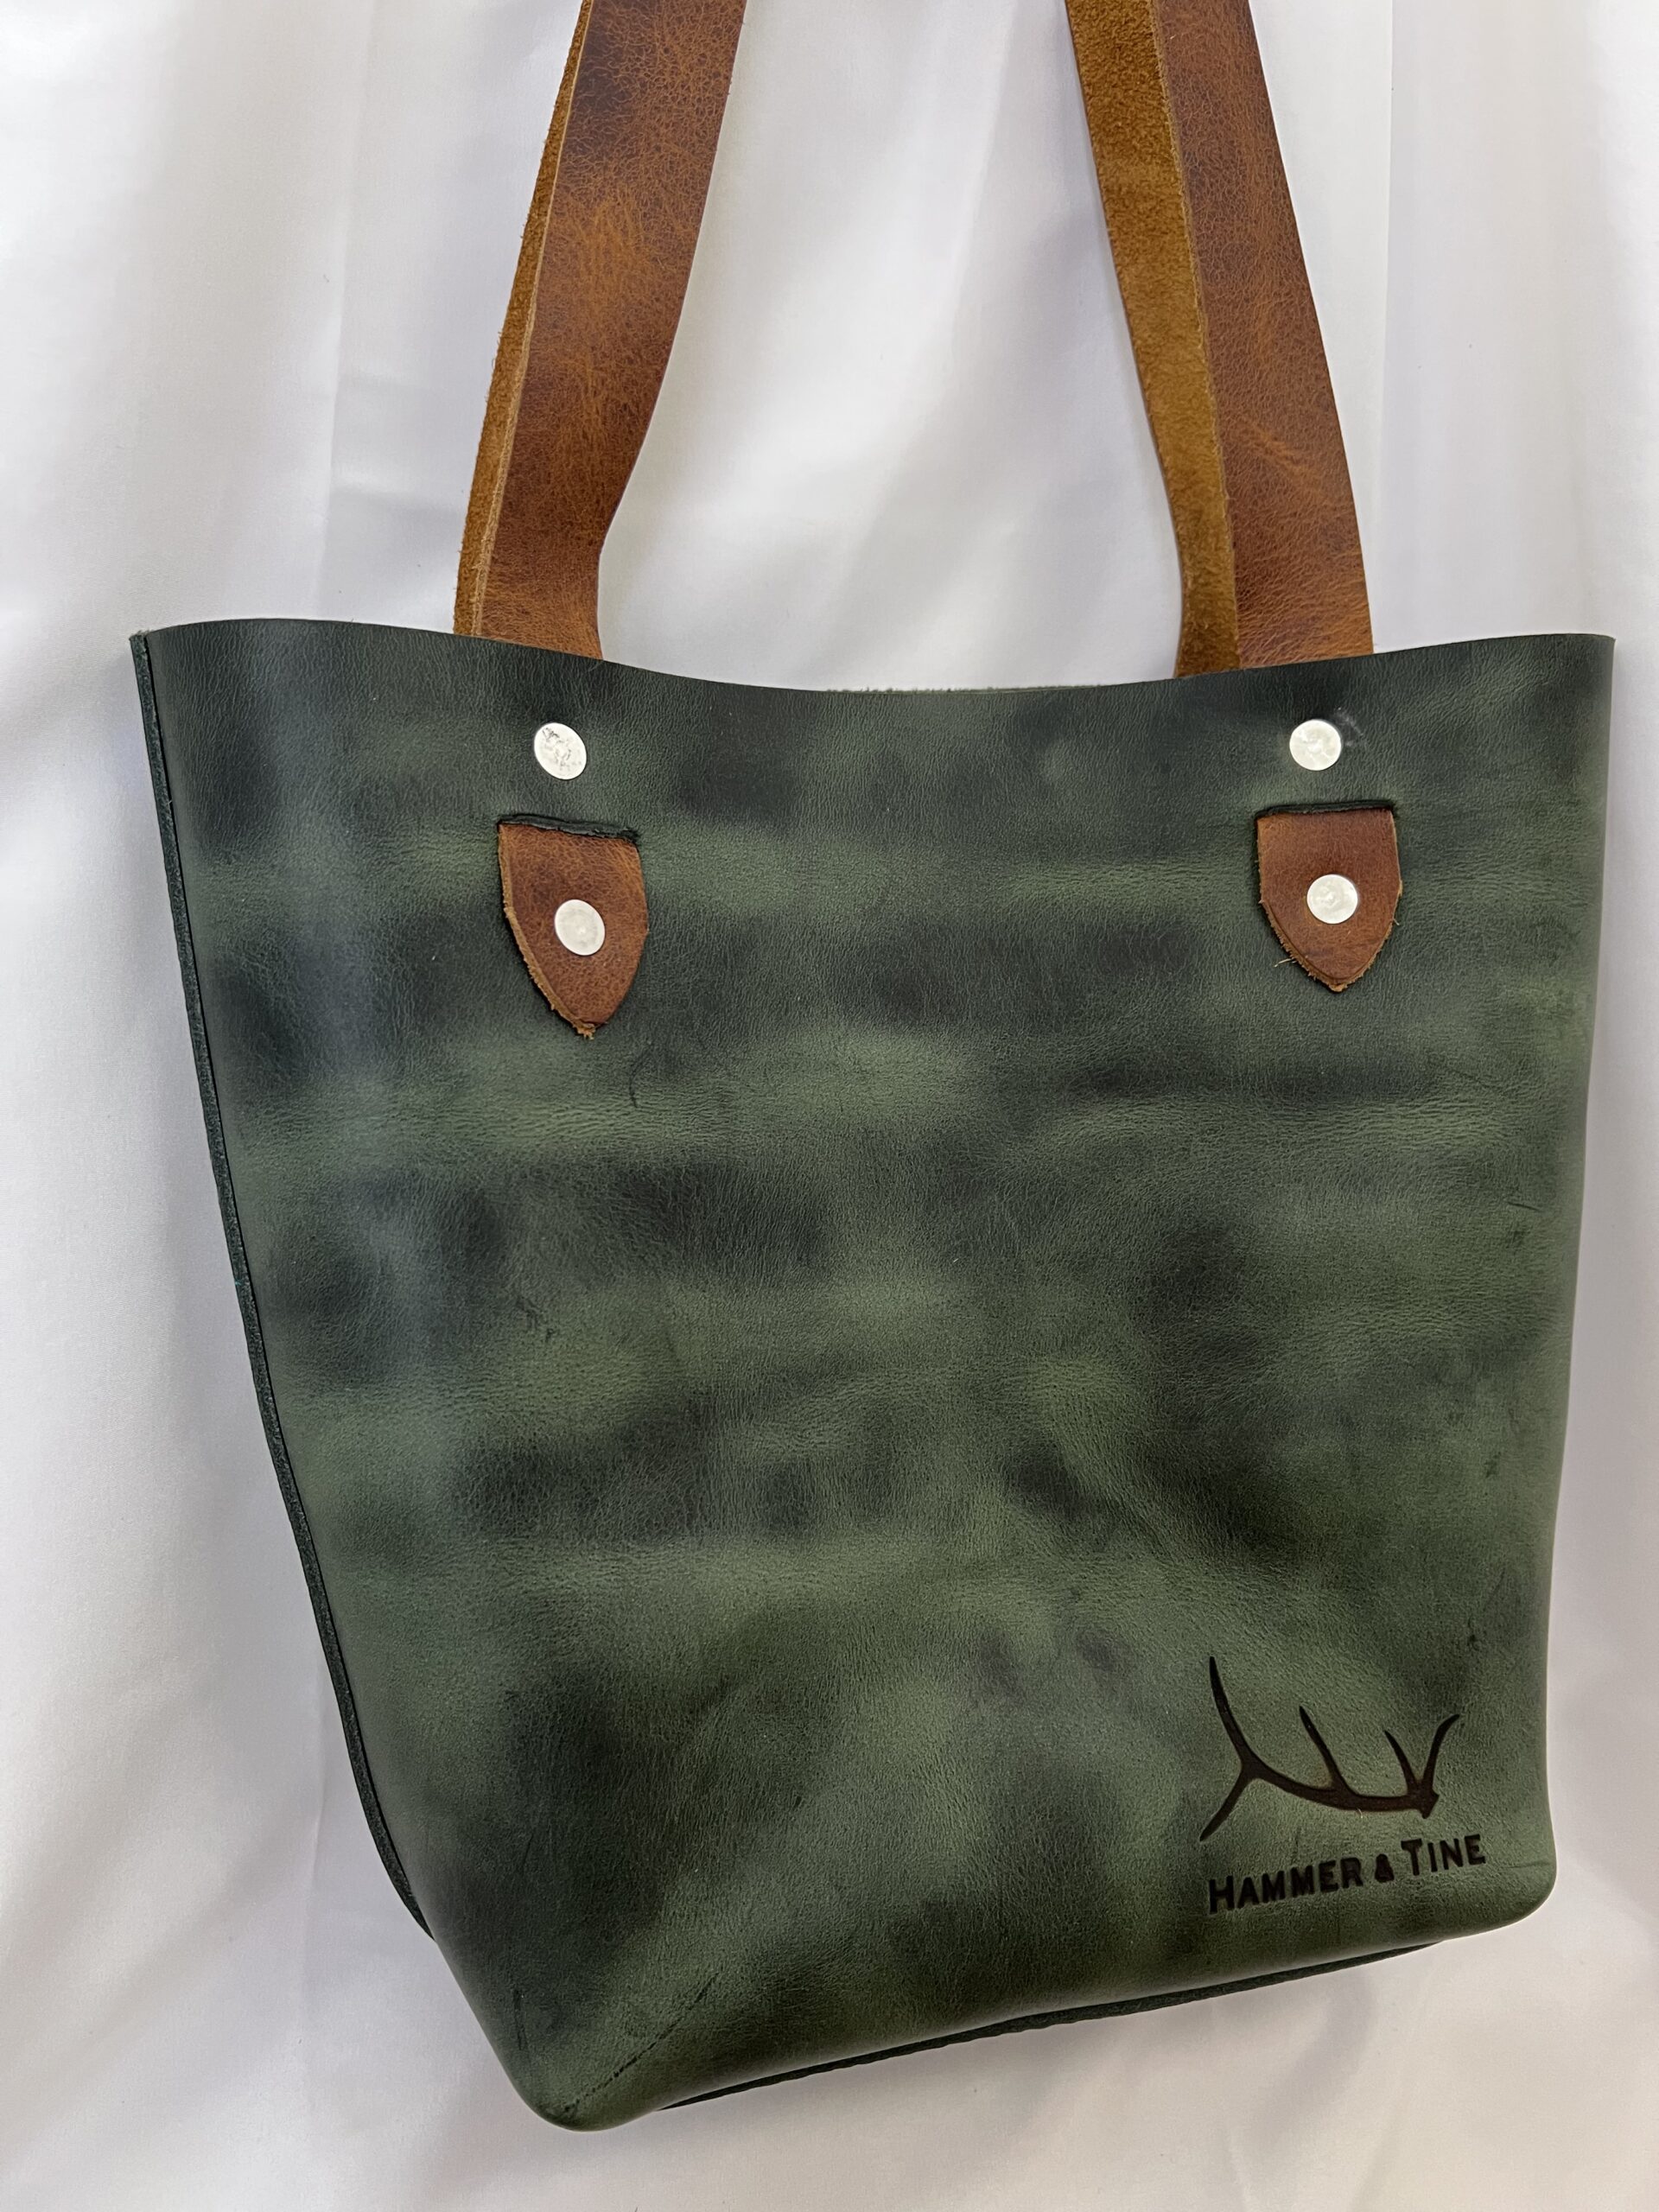 Small green leather tote